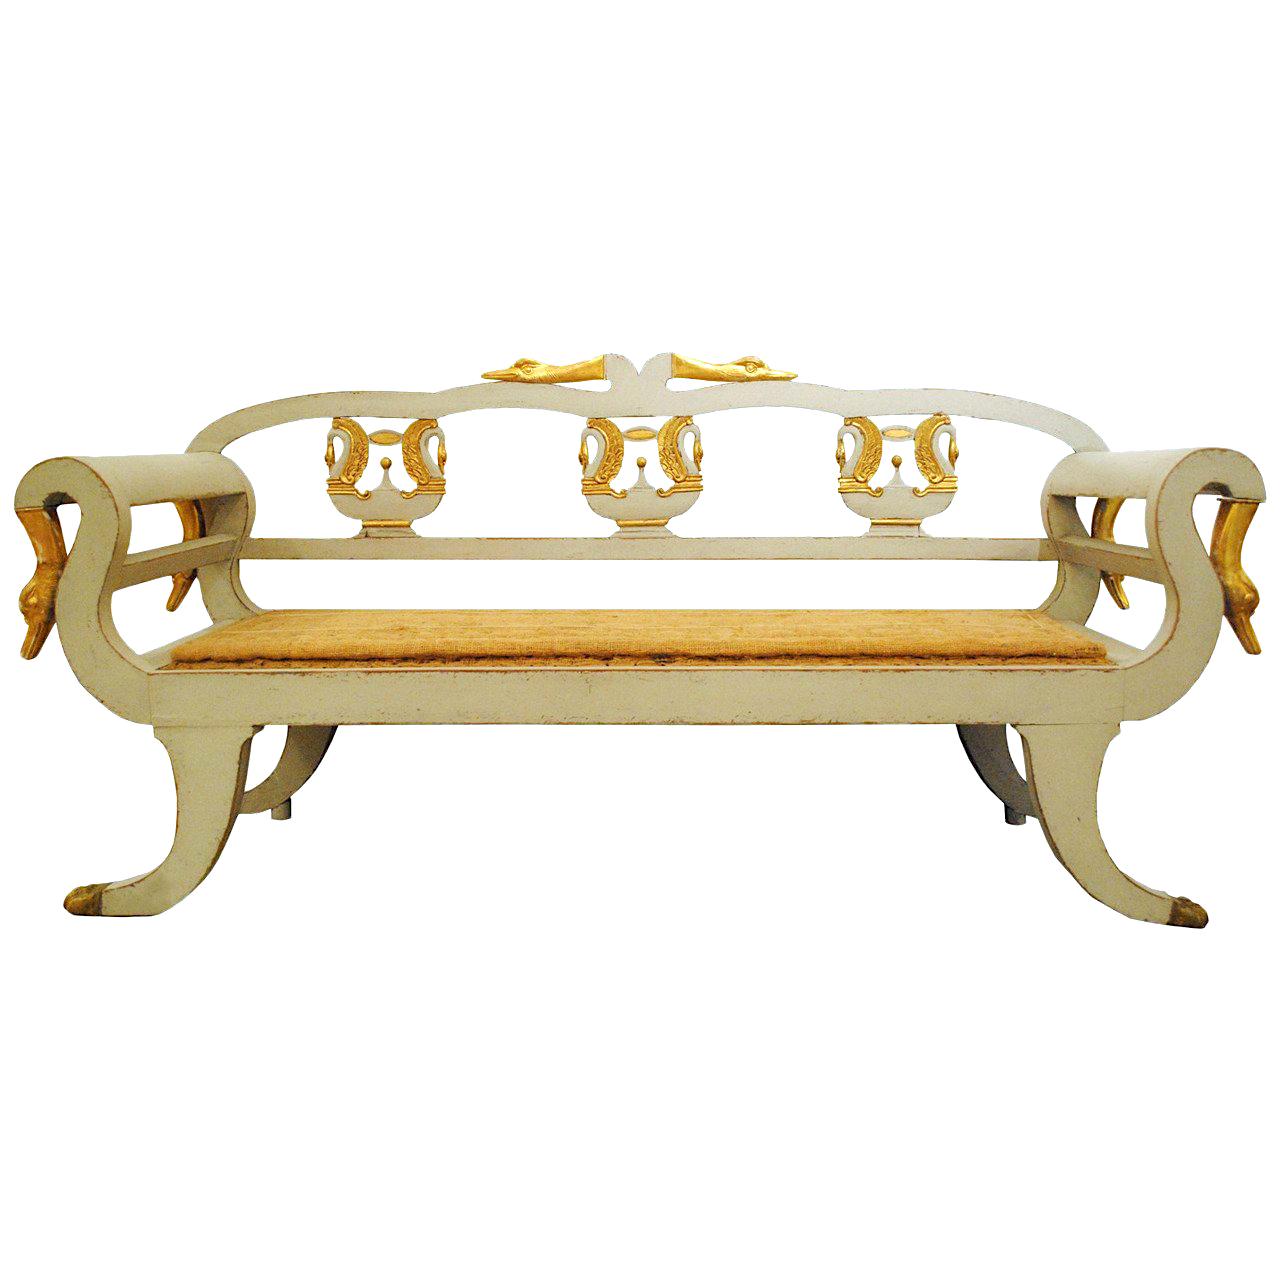 Early 19th Century Rare Russian Bench with Gilded Carvings For Sale